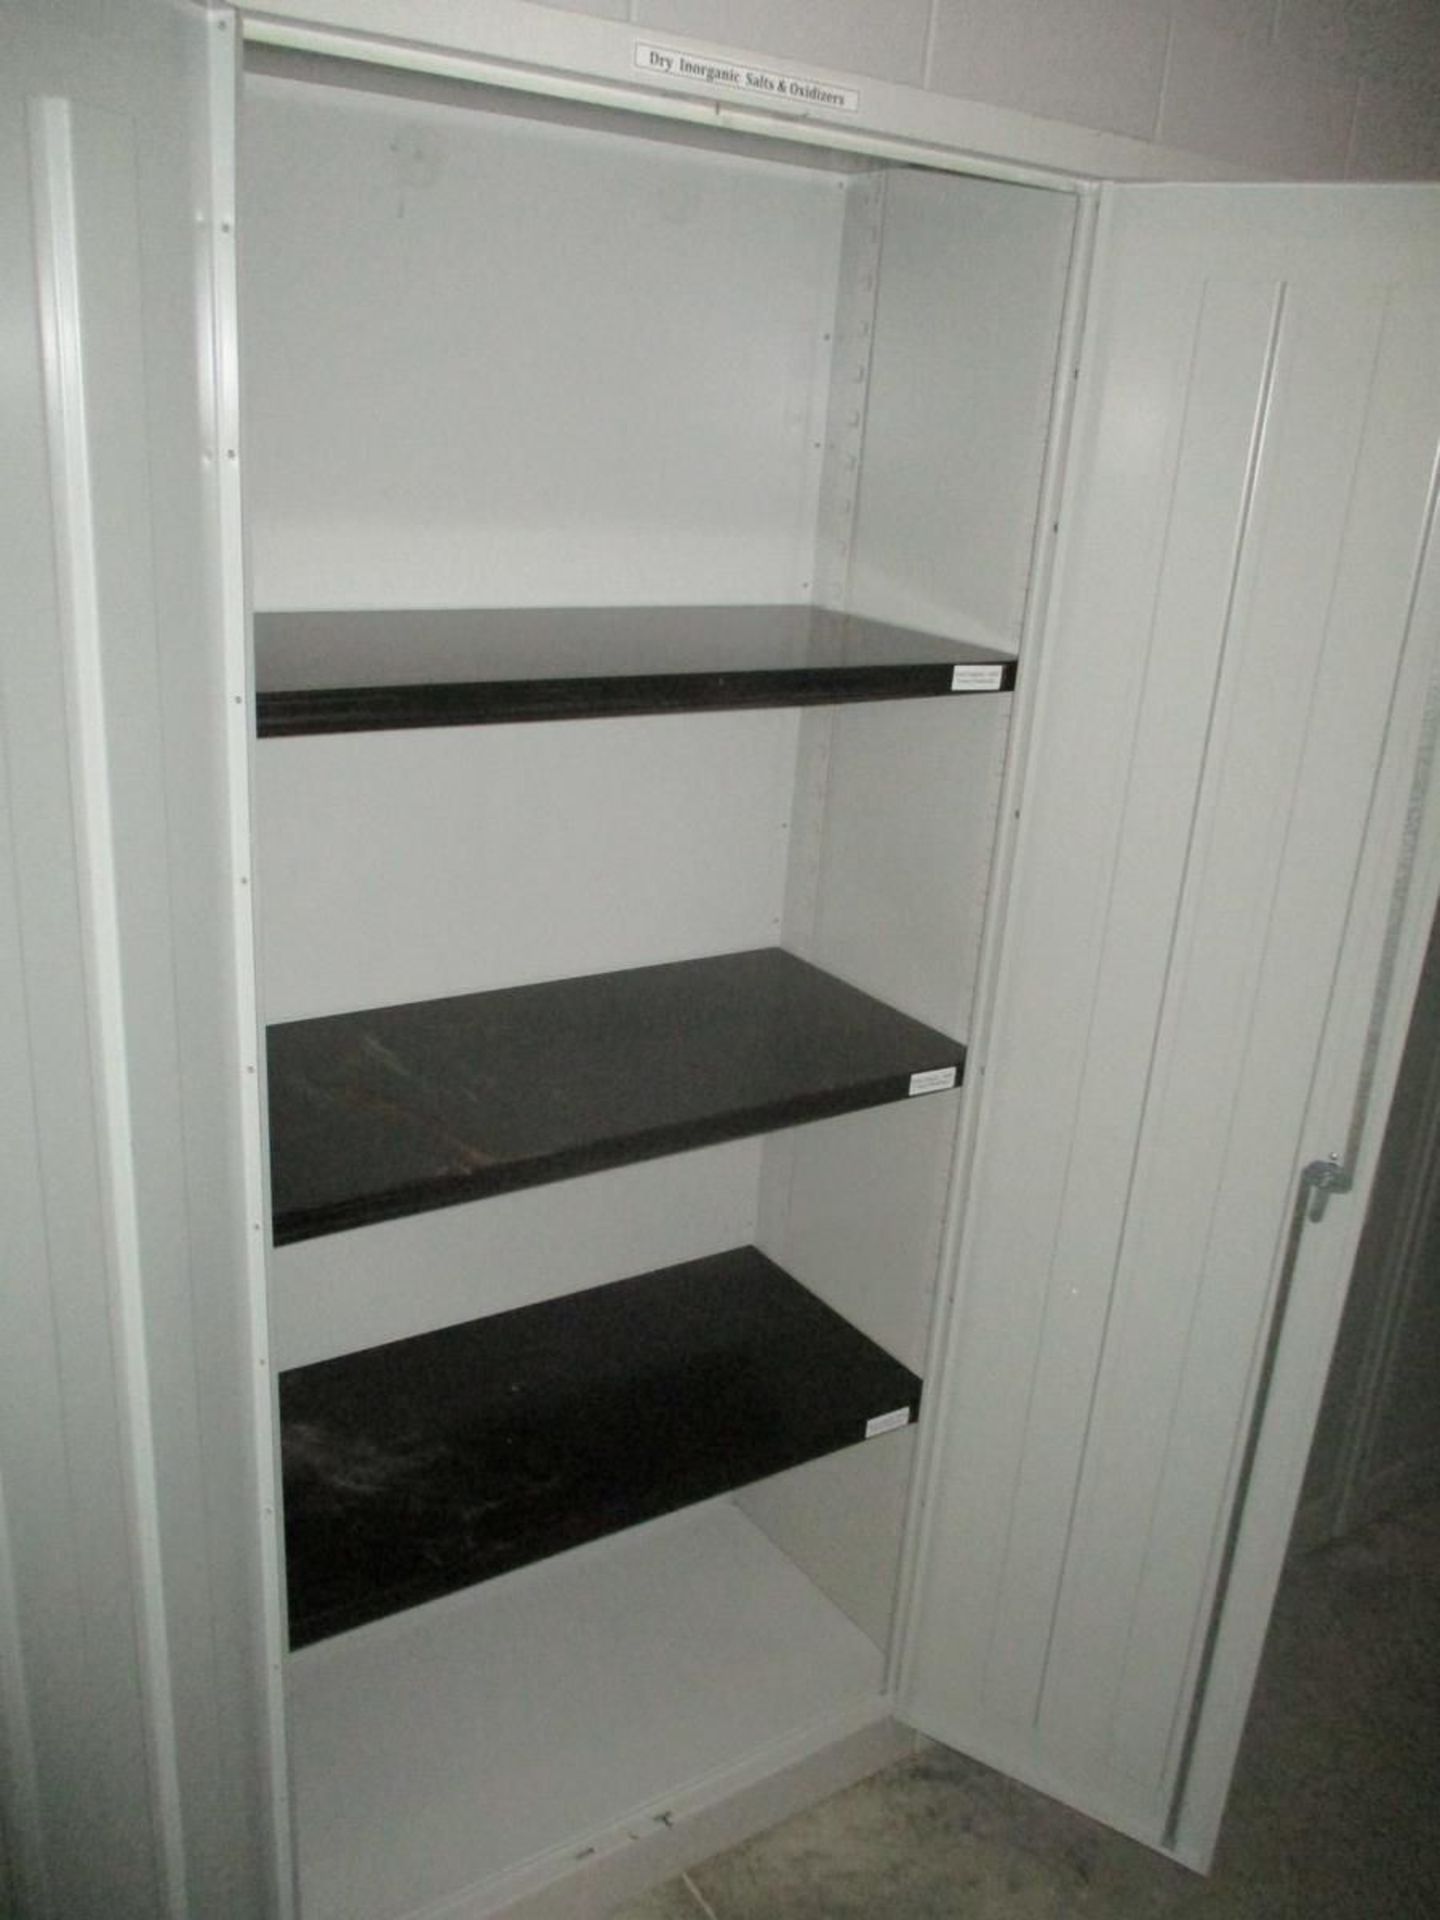 36"" W x 18"" D x 78"" H Steel Storage Cabinets - Image 4 of 8